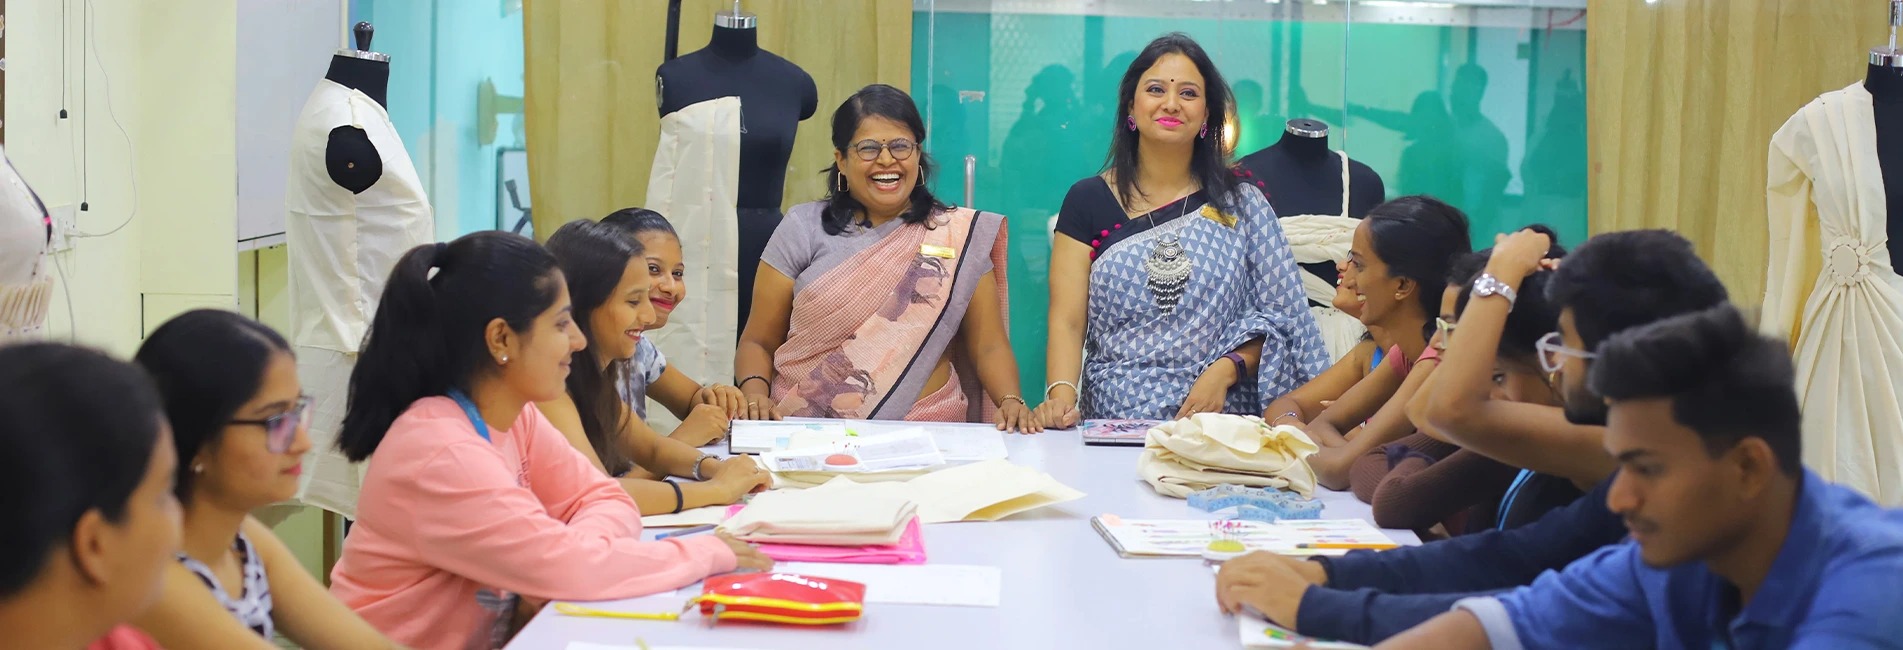 A Picture of Class Room Filled With Fashion Designing Students From IIFT Bangalore Campus